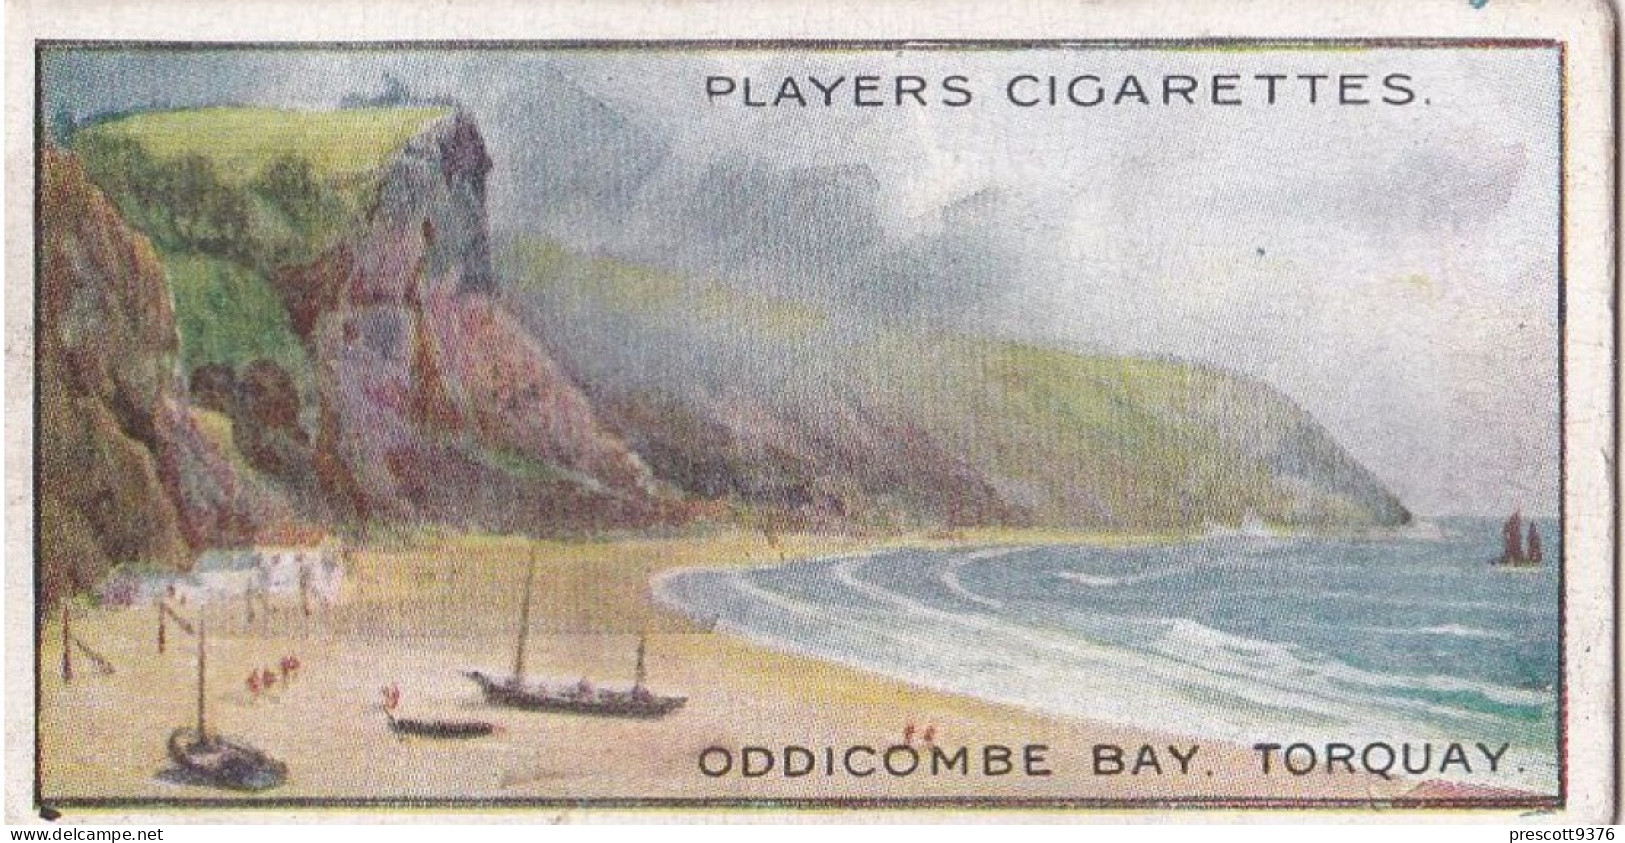 Gems Of British Scenery 1917 - Players Cigarette Card - 8 Oddocome Bay, Torquay - Player's